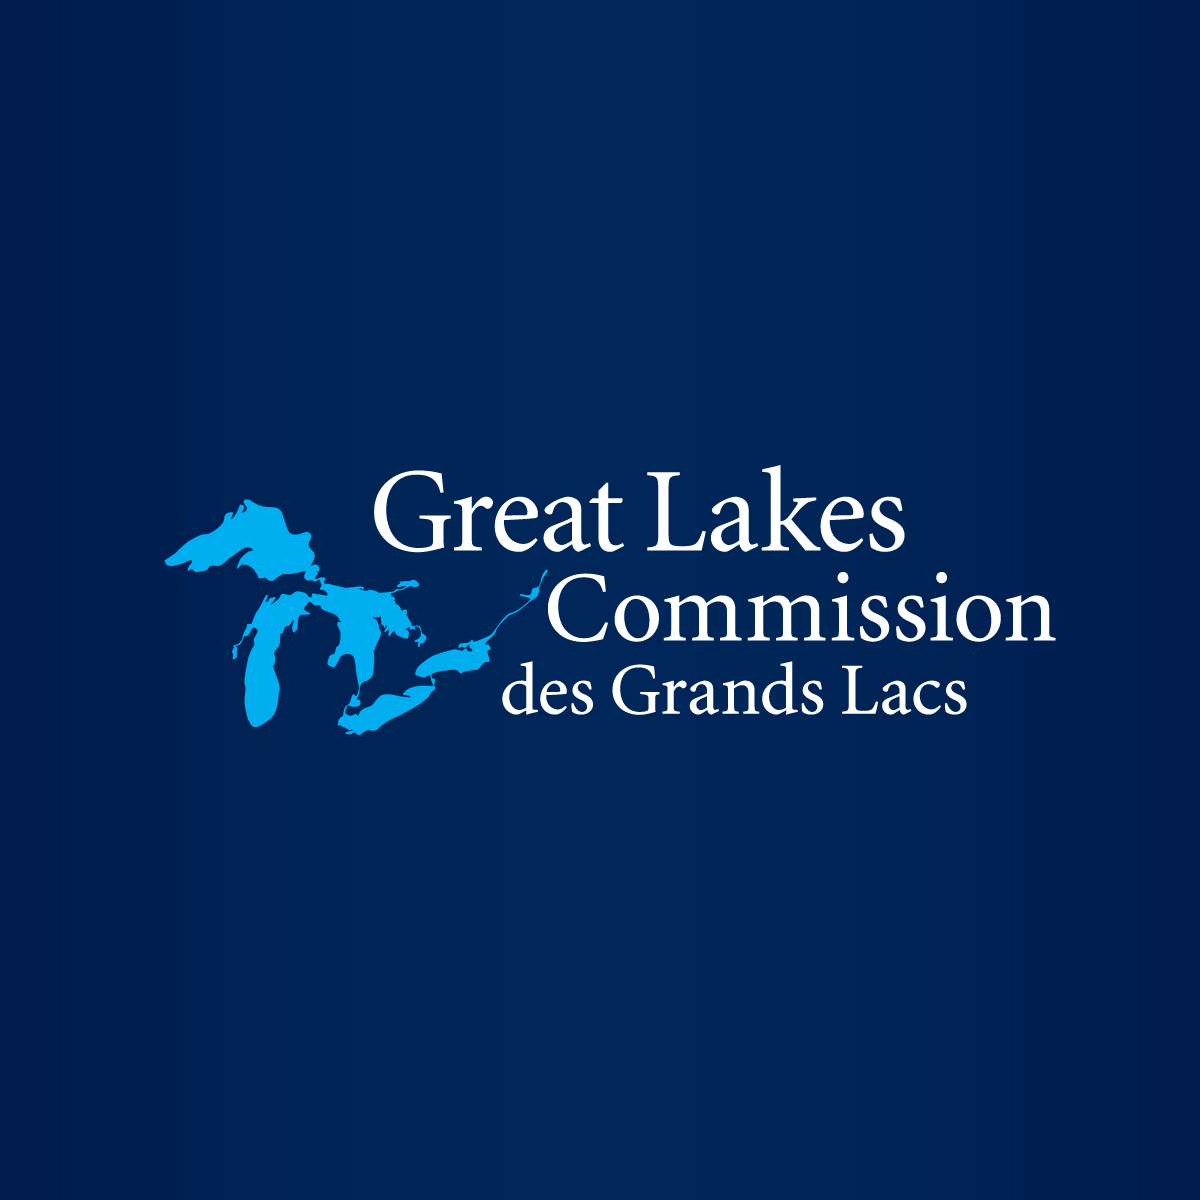 Agency study fails to support turbines in Great Lakes